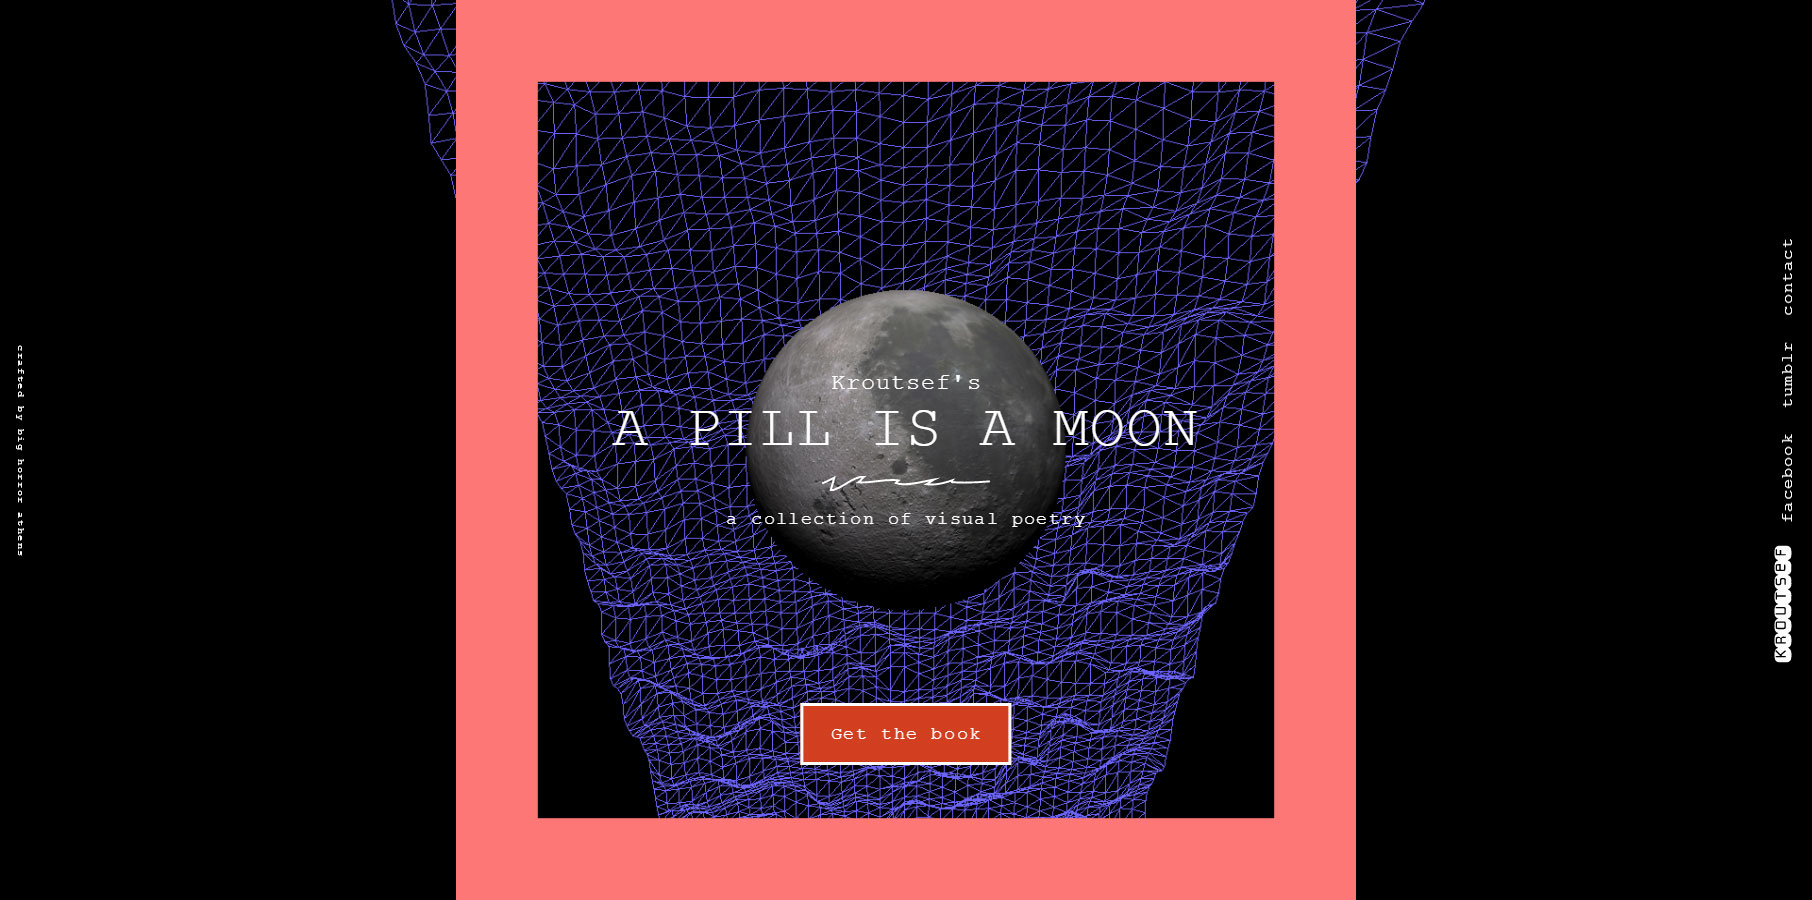 A pill is a moon - Website of the Day